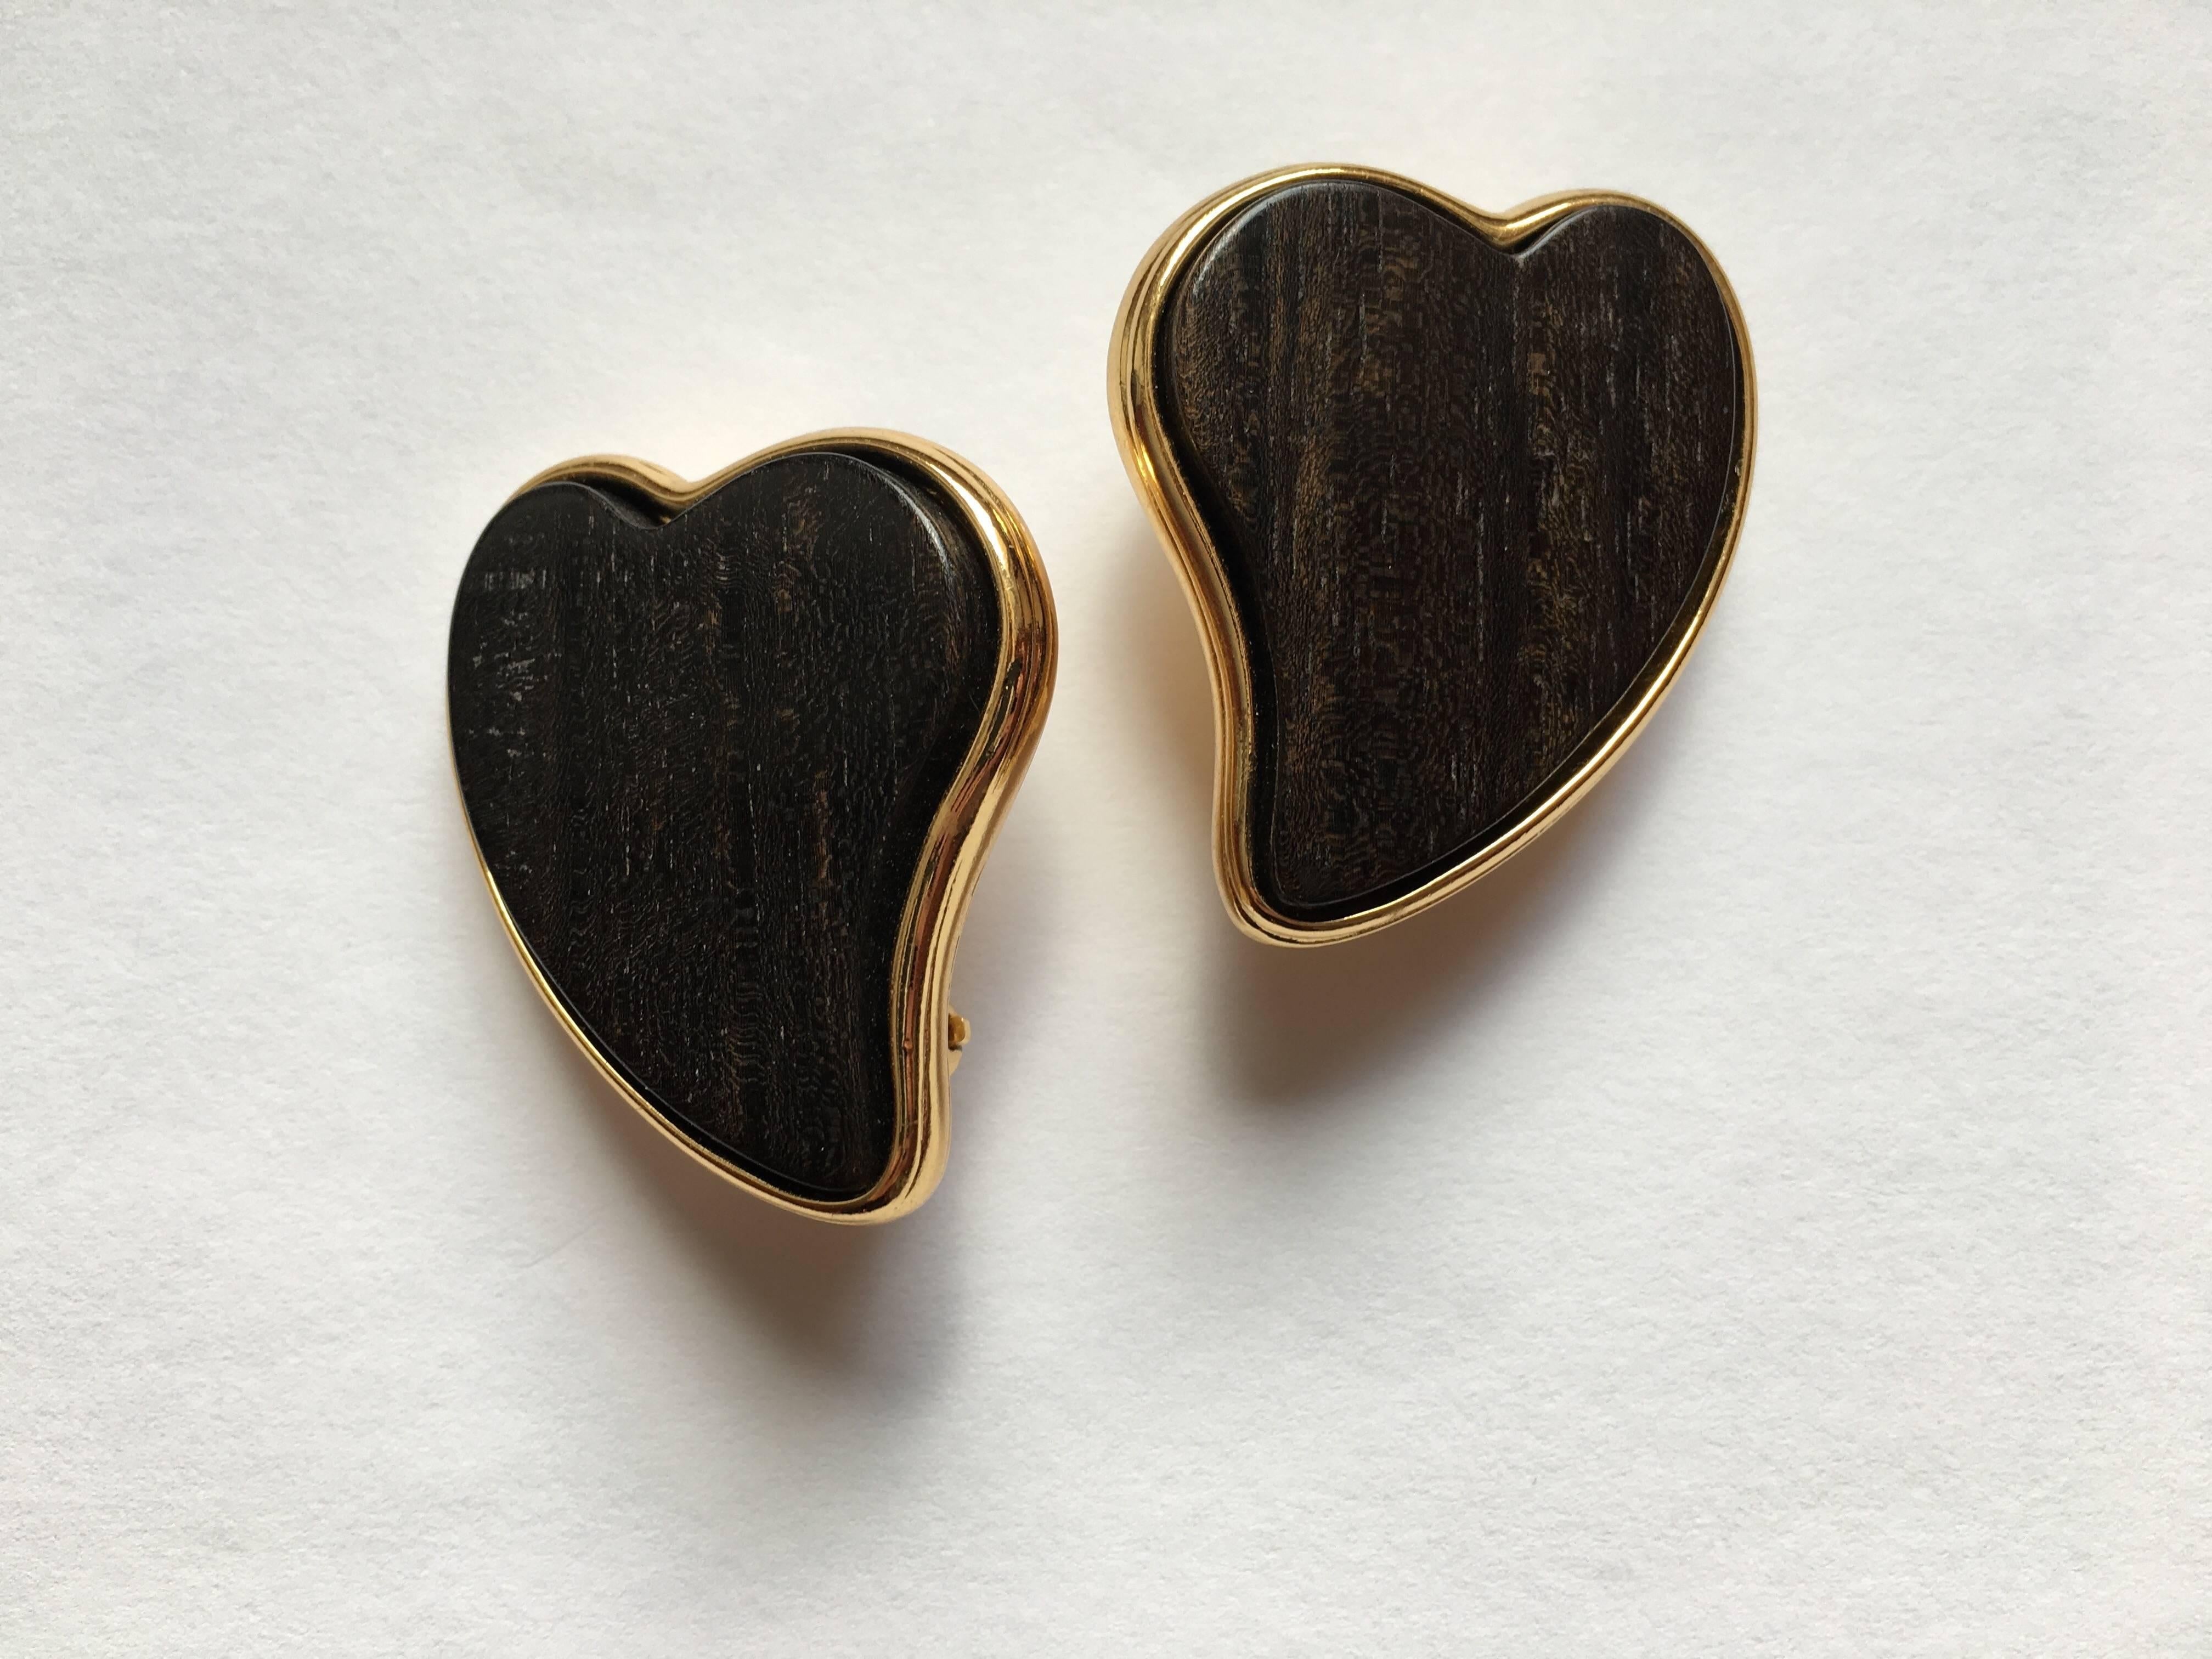 This is a gorgeous pair of Yves Saint Laurent 1980s heart-shaped clip-on earrings in gold-tone metal set with wooden hearts. They are marked on the back of the clips with 